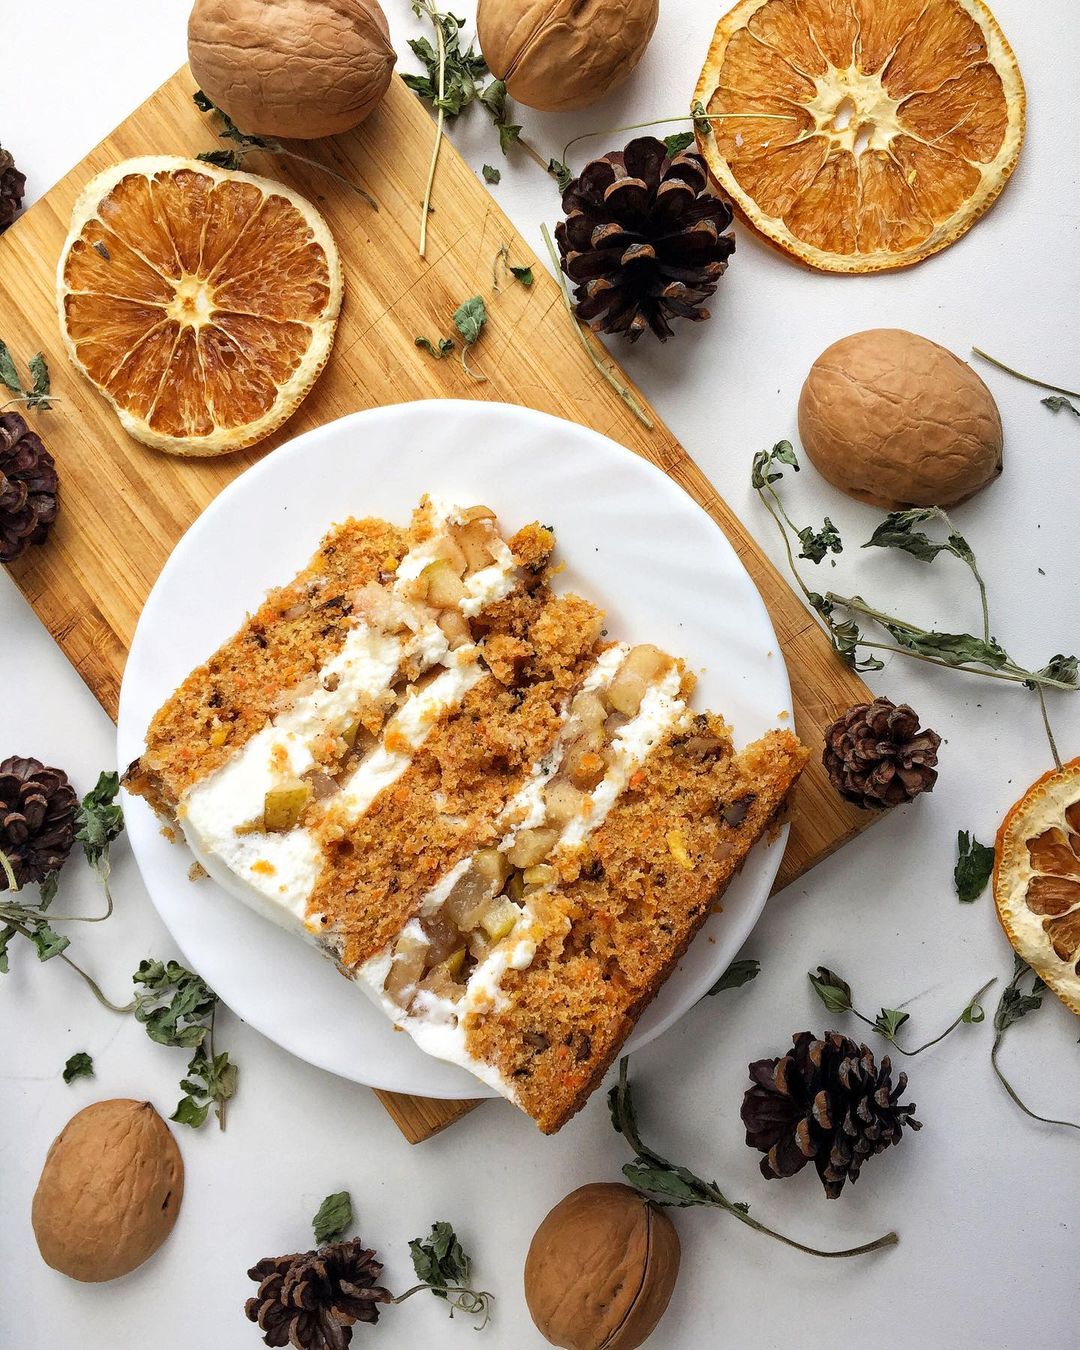 CARROT CAKE WITH WALNUTS & PEARS